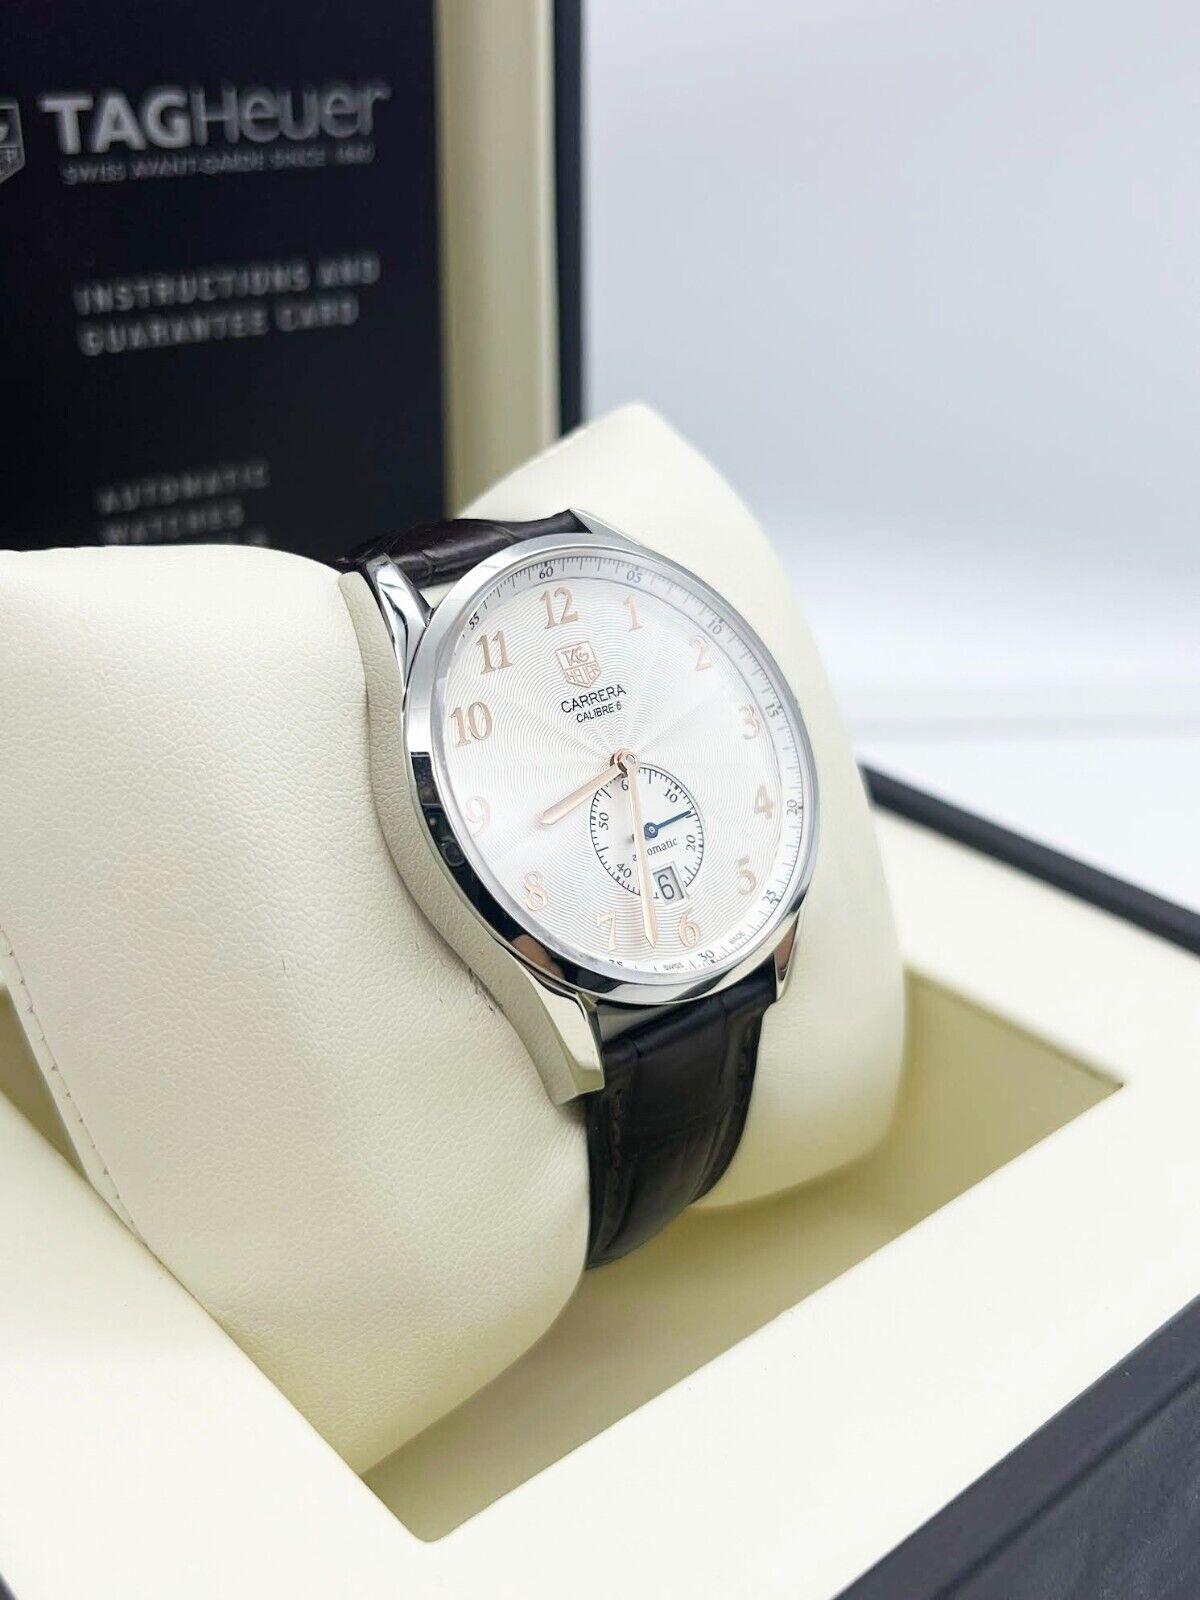 Style Number: WAS2112.FC6181 

 

Model: Carrera Heritage 

 

Case Material: Stainless Steel 

 

Band: Leather 

 

Bezel:  Stainless Steel 

 

Dial: Silver

 

Face: Sapphire Crystal 

 

Case Size: 39mm

 

Includes: 

-Tag Box &